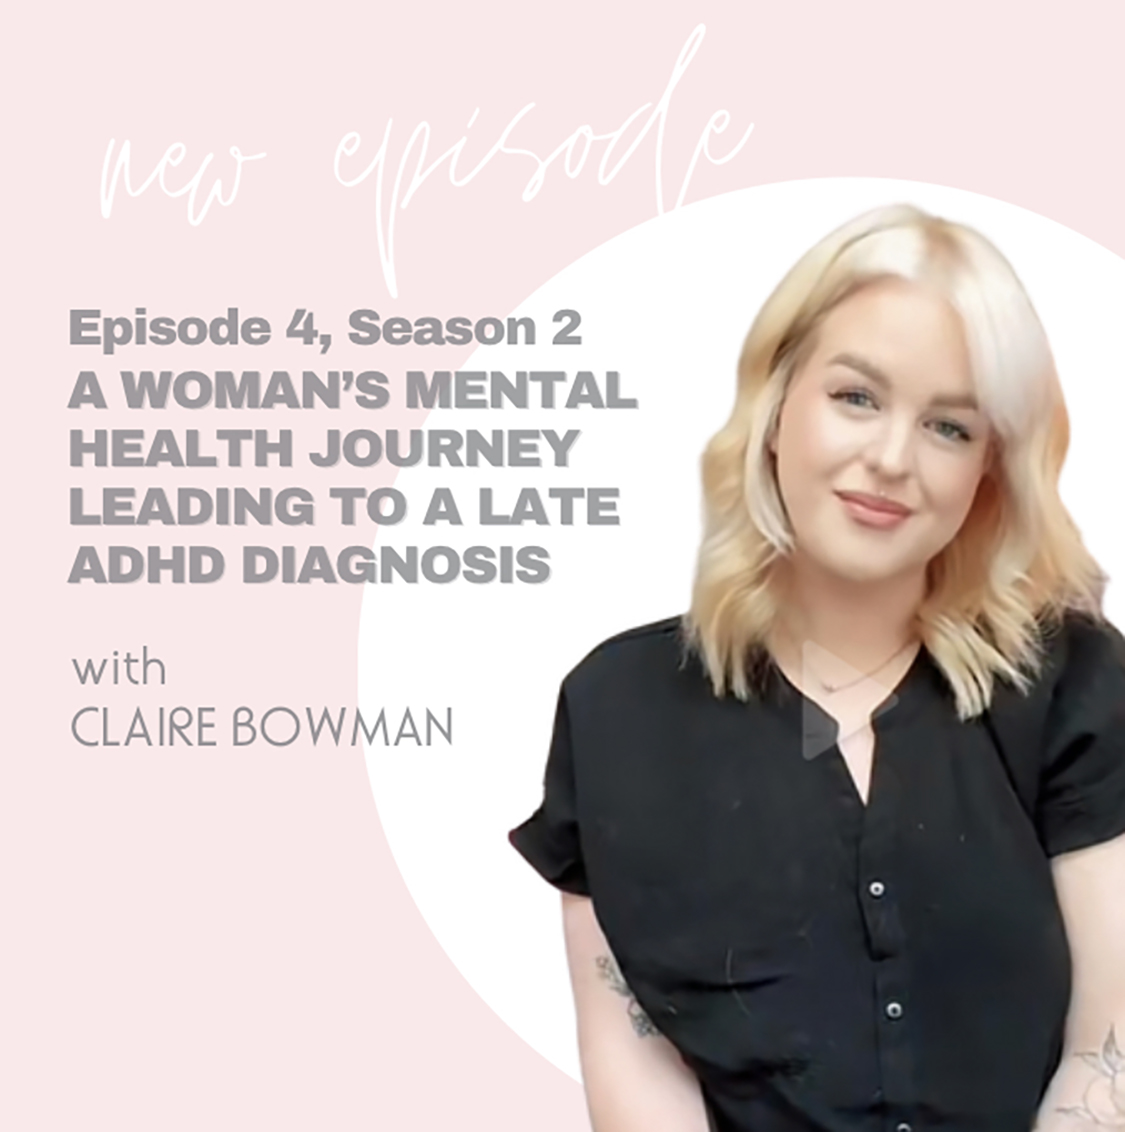 A WOMAN'S MENTAL HEALTH JOURNEY LEADING TO A LATE ADHD DIAGNOSIS with GUEST CLAIRE BOWMAN www.sassandsmalls.com